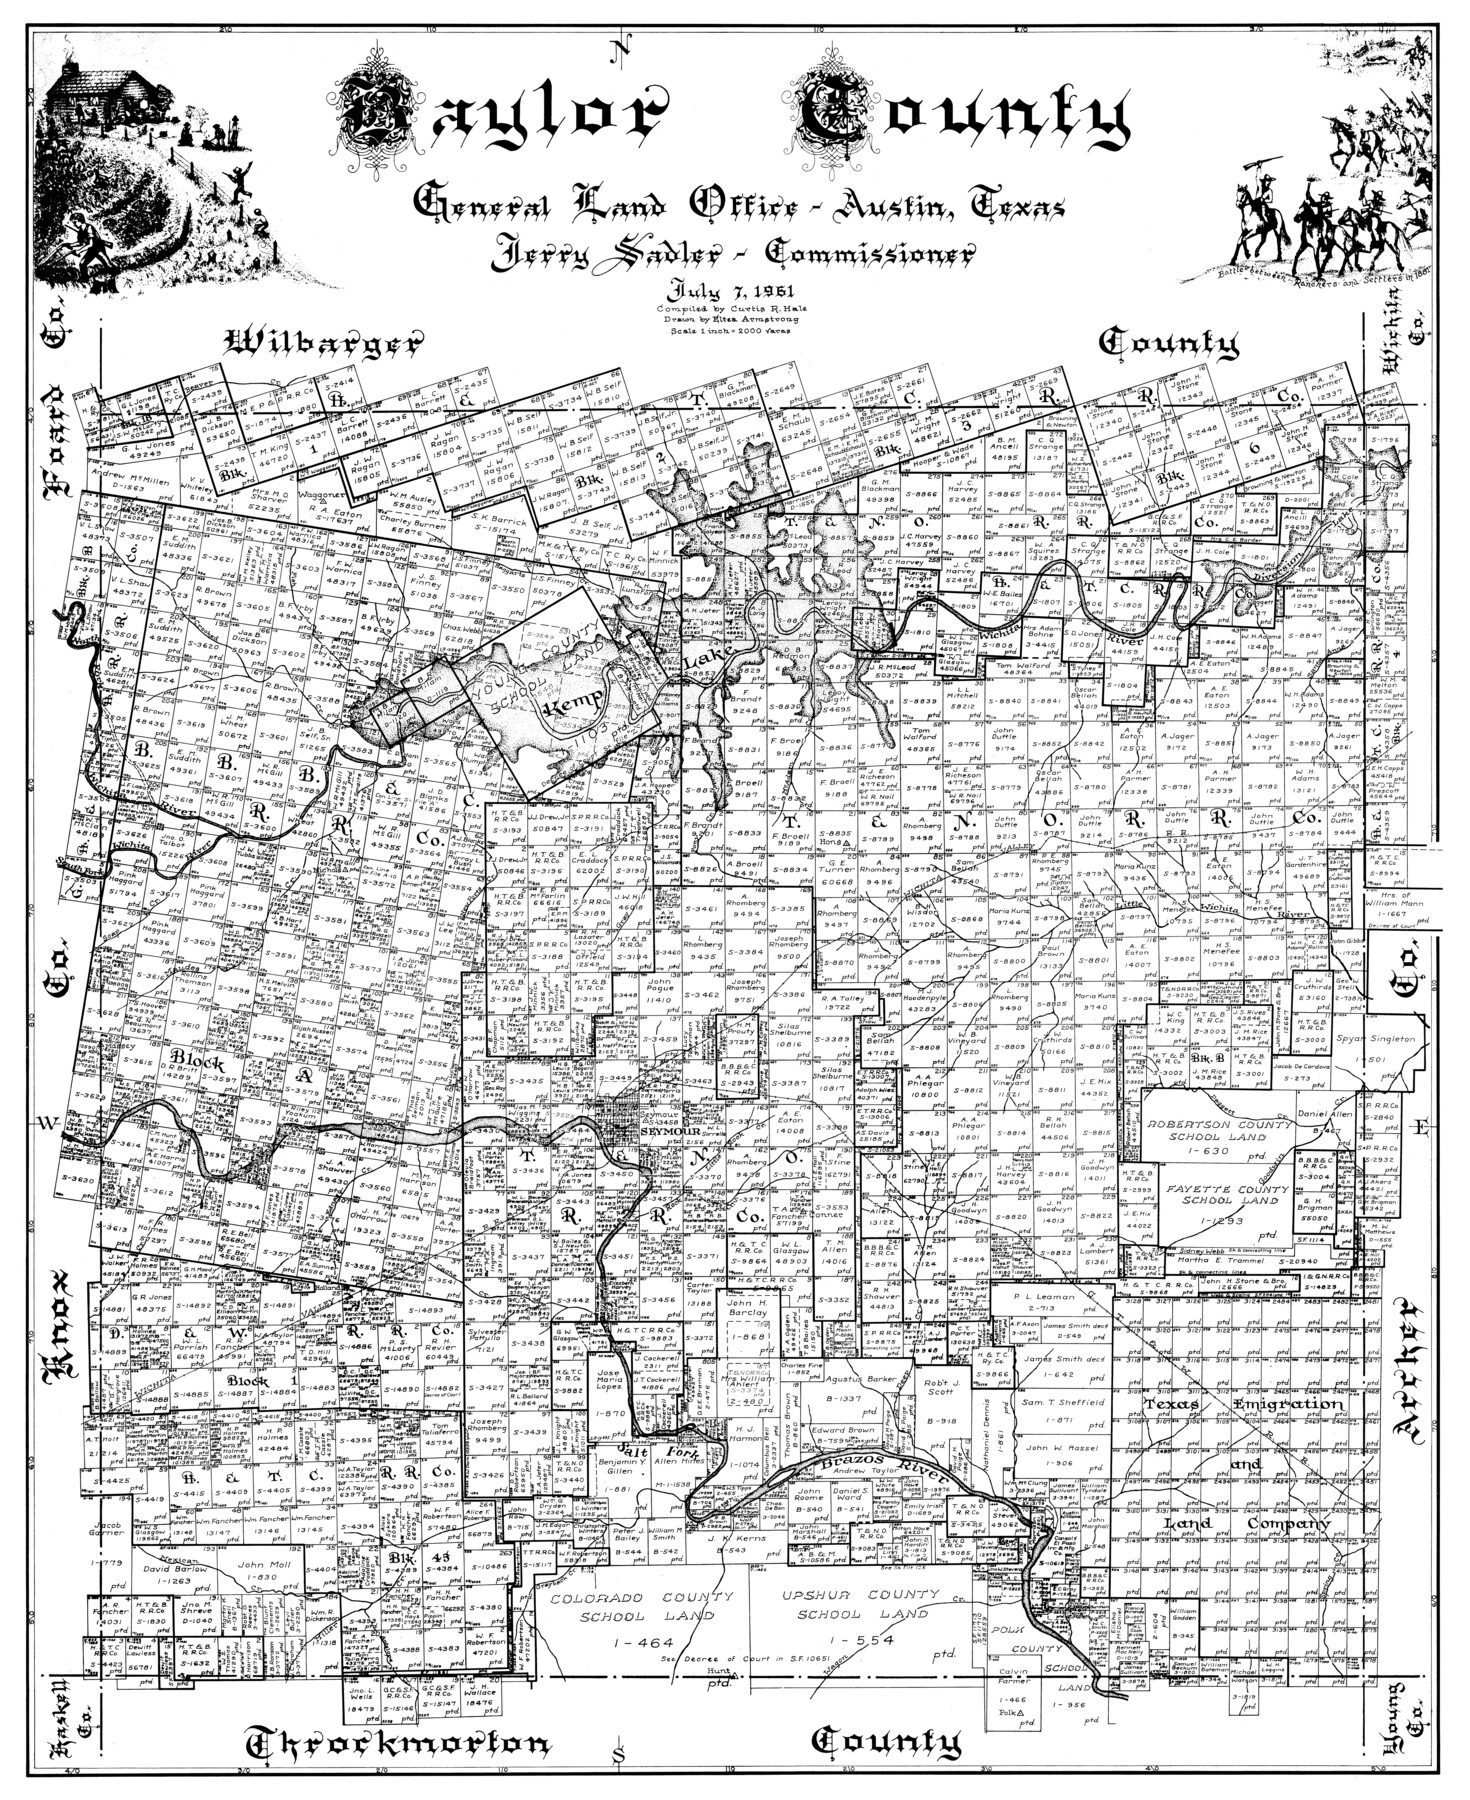 77209, Baylor County, General Map Collection